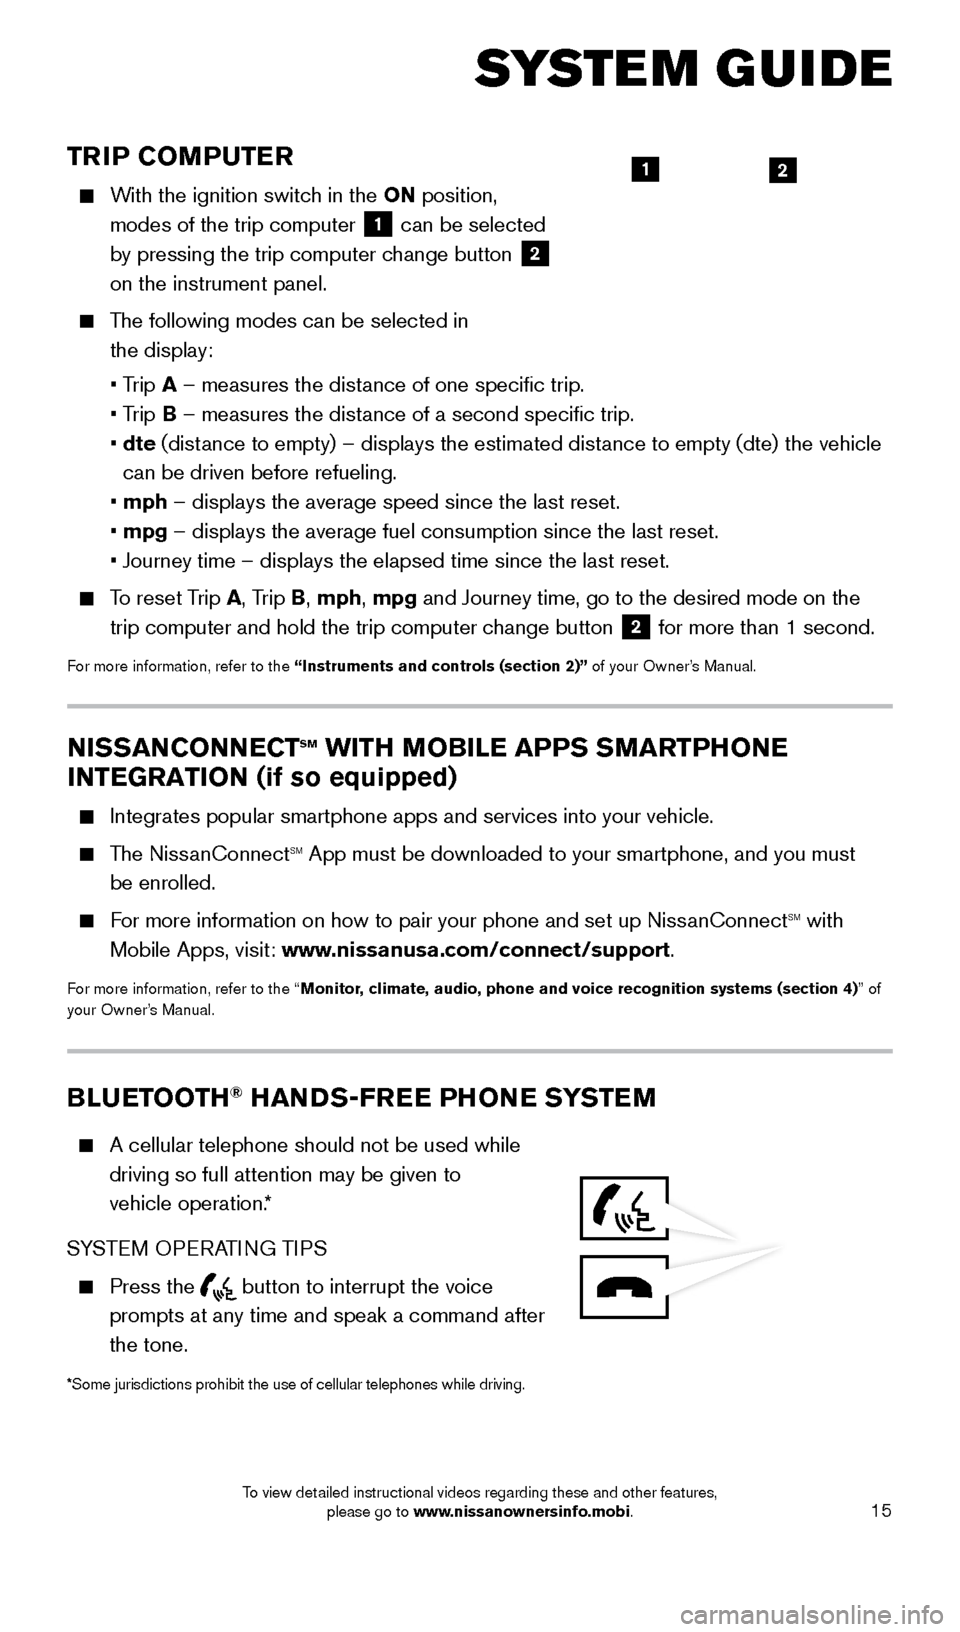 NISSAN XTERRA 2015 N50 / 2.G Quick Reference Guide 15
TRIP COMPUTER
    With the ignition switch in the ON position,  modes of the trip computer  
1 can be selected 
by pressing the trip computer change button  2 
on the instrument panel.
    The foll